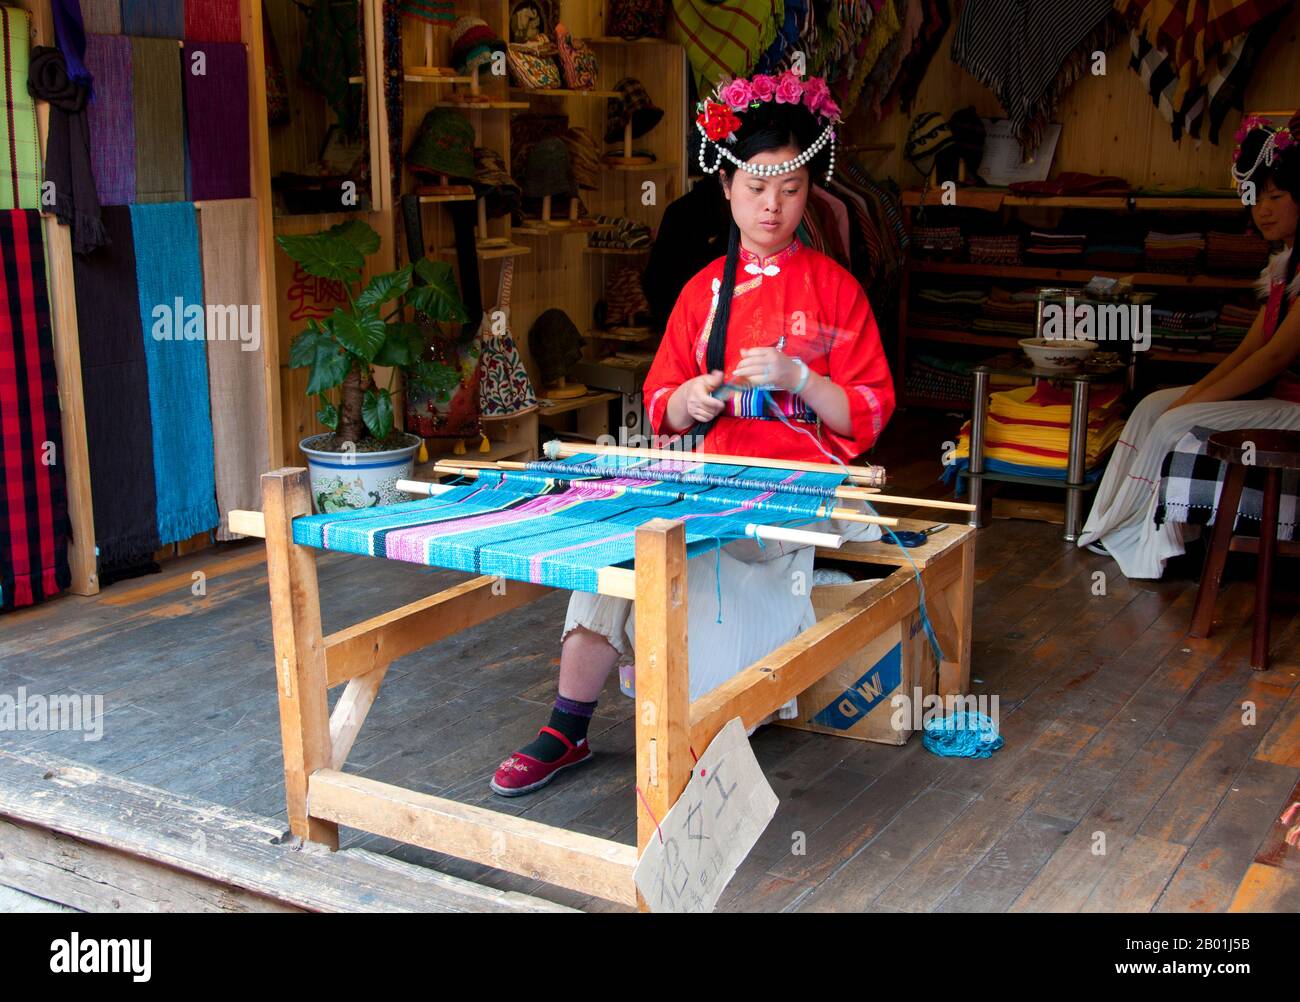 China: Mosuo woman weaving in Lijiang Old Town, Yunnan Province.  The Mosuo (also Moso or Musuo), but known often to themselves as the Na, are a small ethnic group living in Yunnan and Sichuan Provinces, close to the border with Tibet. With a population of approximately 40,000, most of them live in the Yongning region and around Lugu Lake, high in the Tibetan Himalayas.  Although the Mosuo are culturally distinct from the Nakhi, the Chinese government places them as members of the Nakhi (aka Naxi) minority.  The Old Town of Lijiang dates back more than 800 years and was once an important town. Stock Photo